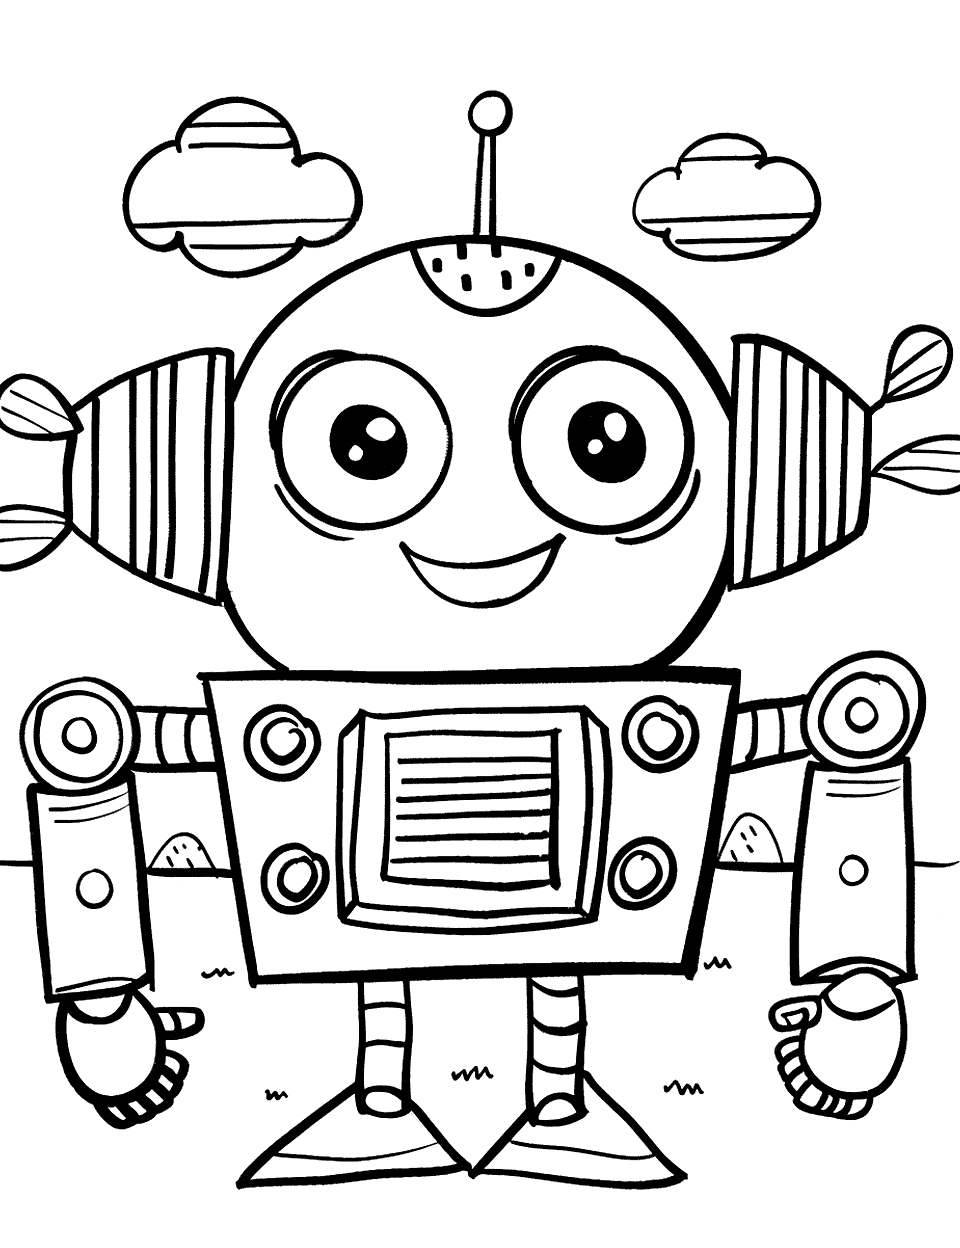 Rectangle Robot Shapes Coloring Page - A friendly robot with a rectangular body and circular head.